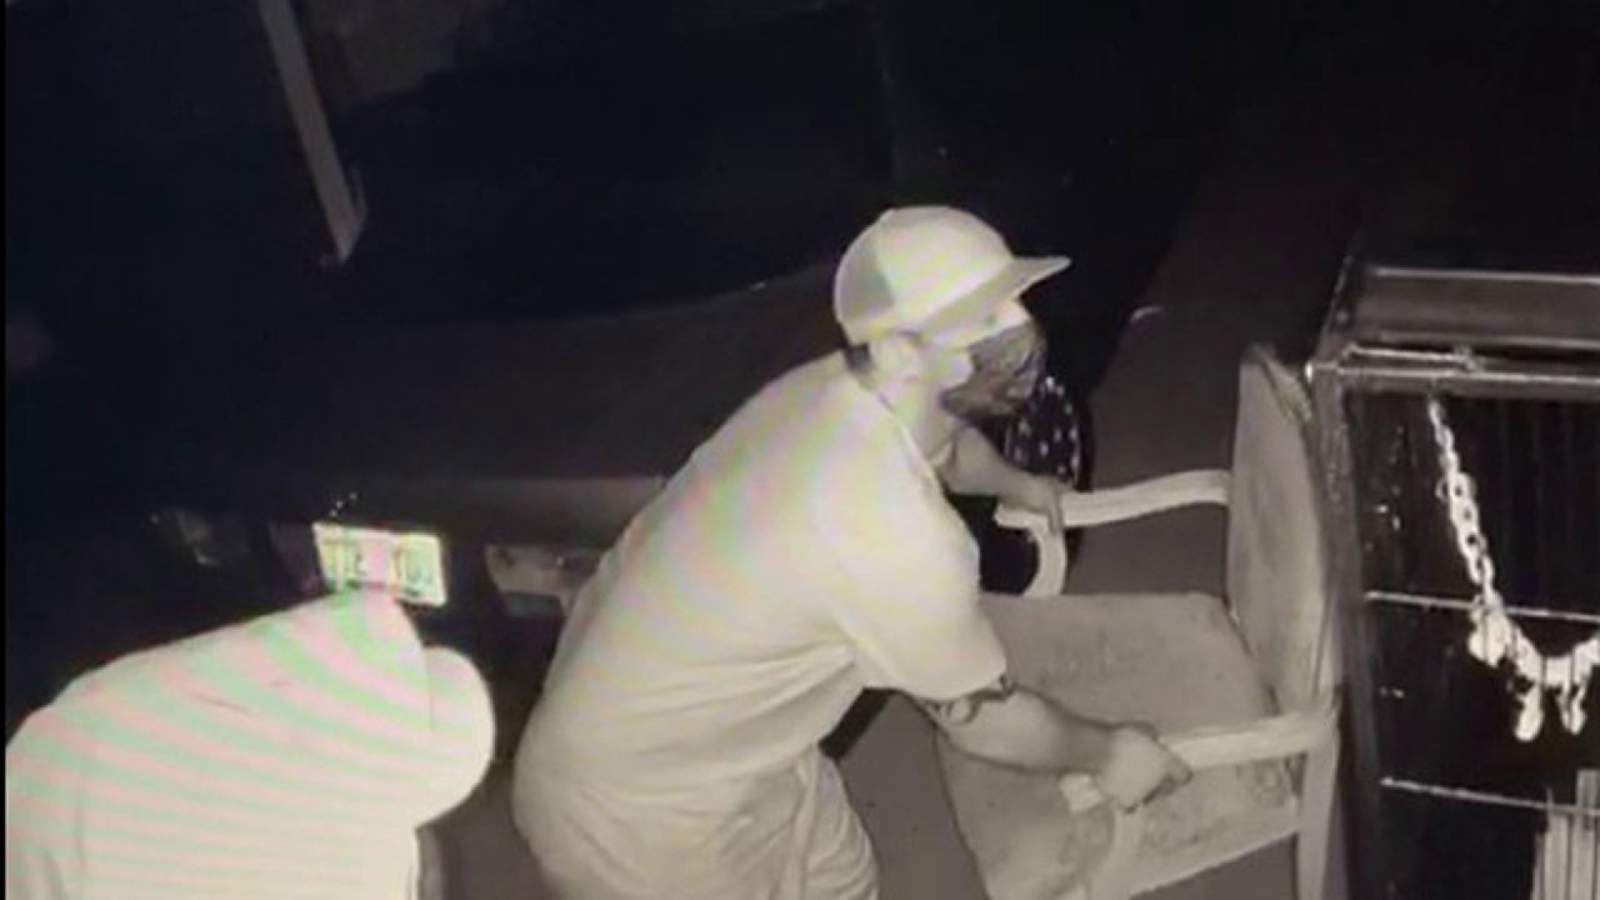 Video shows burglars take $6,000 from shed in Flagami